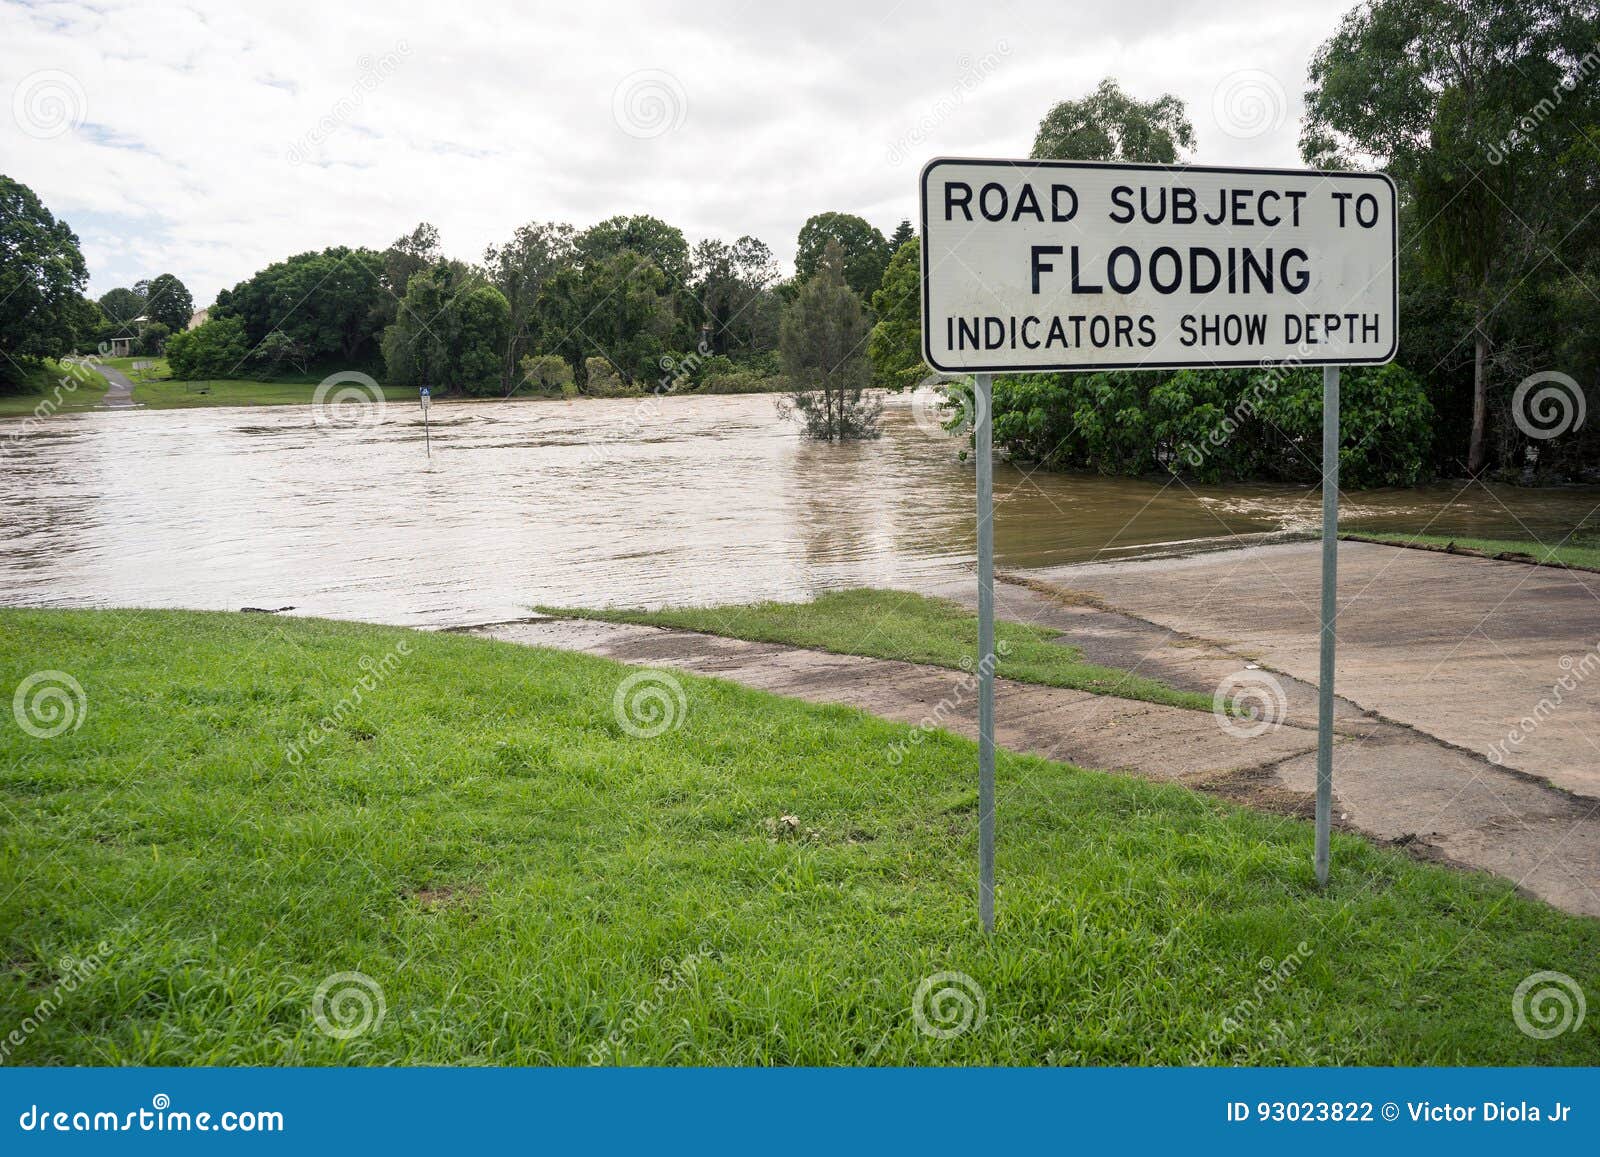 road subject to flooding